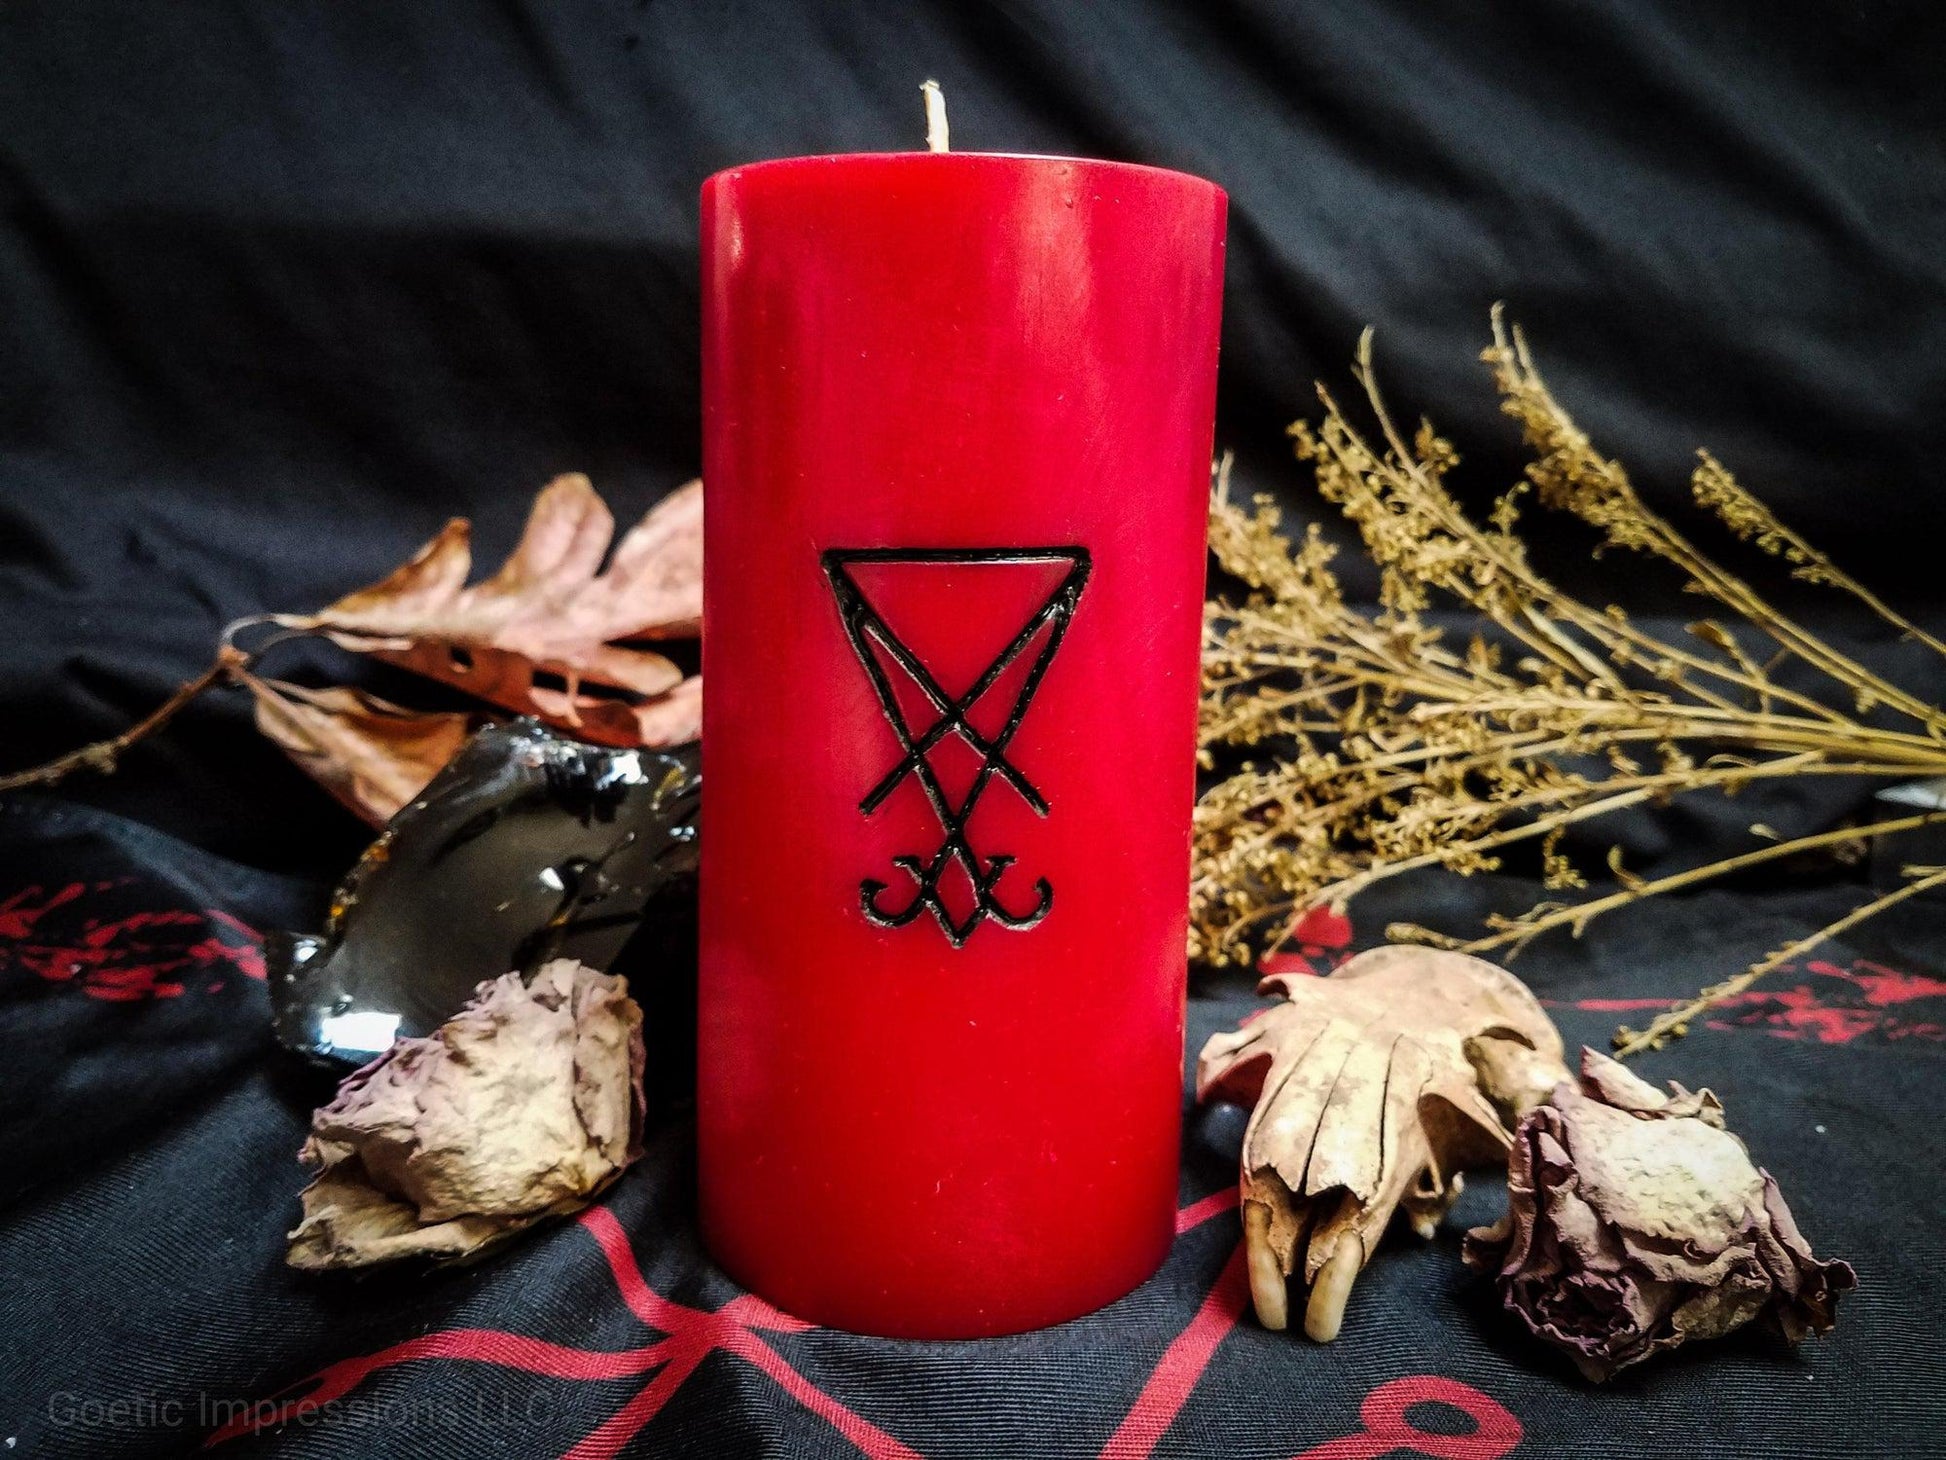 Red pillar candle with a black Lucifer sigil carved into it.